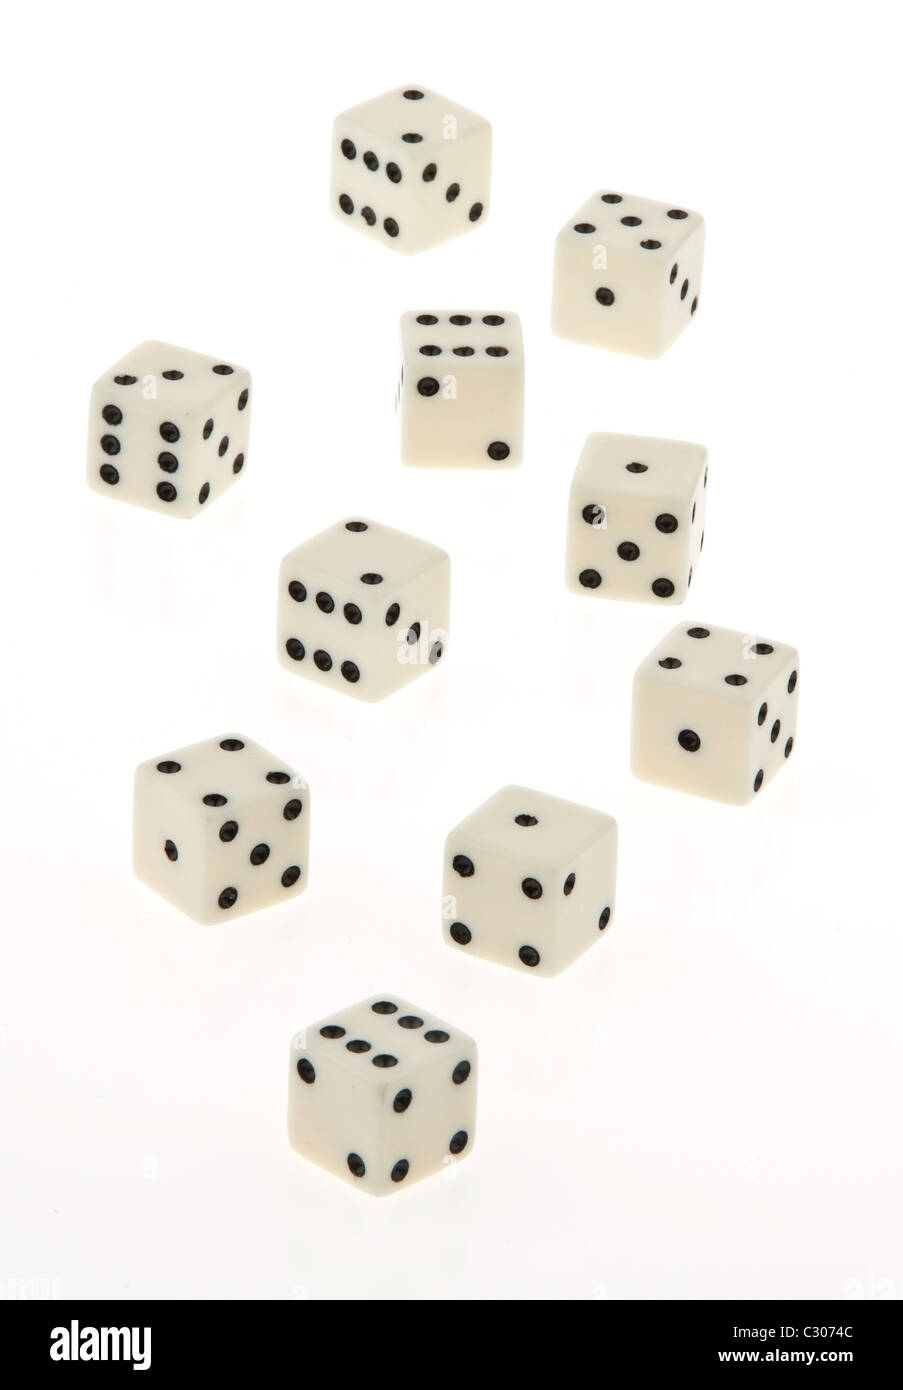 Cube of a game on a white background. Stock Photo